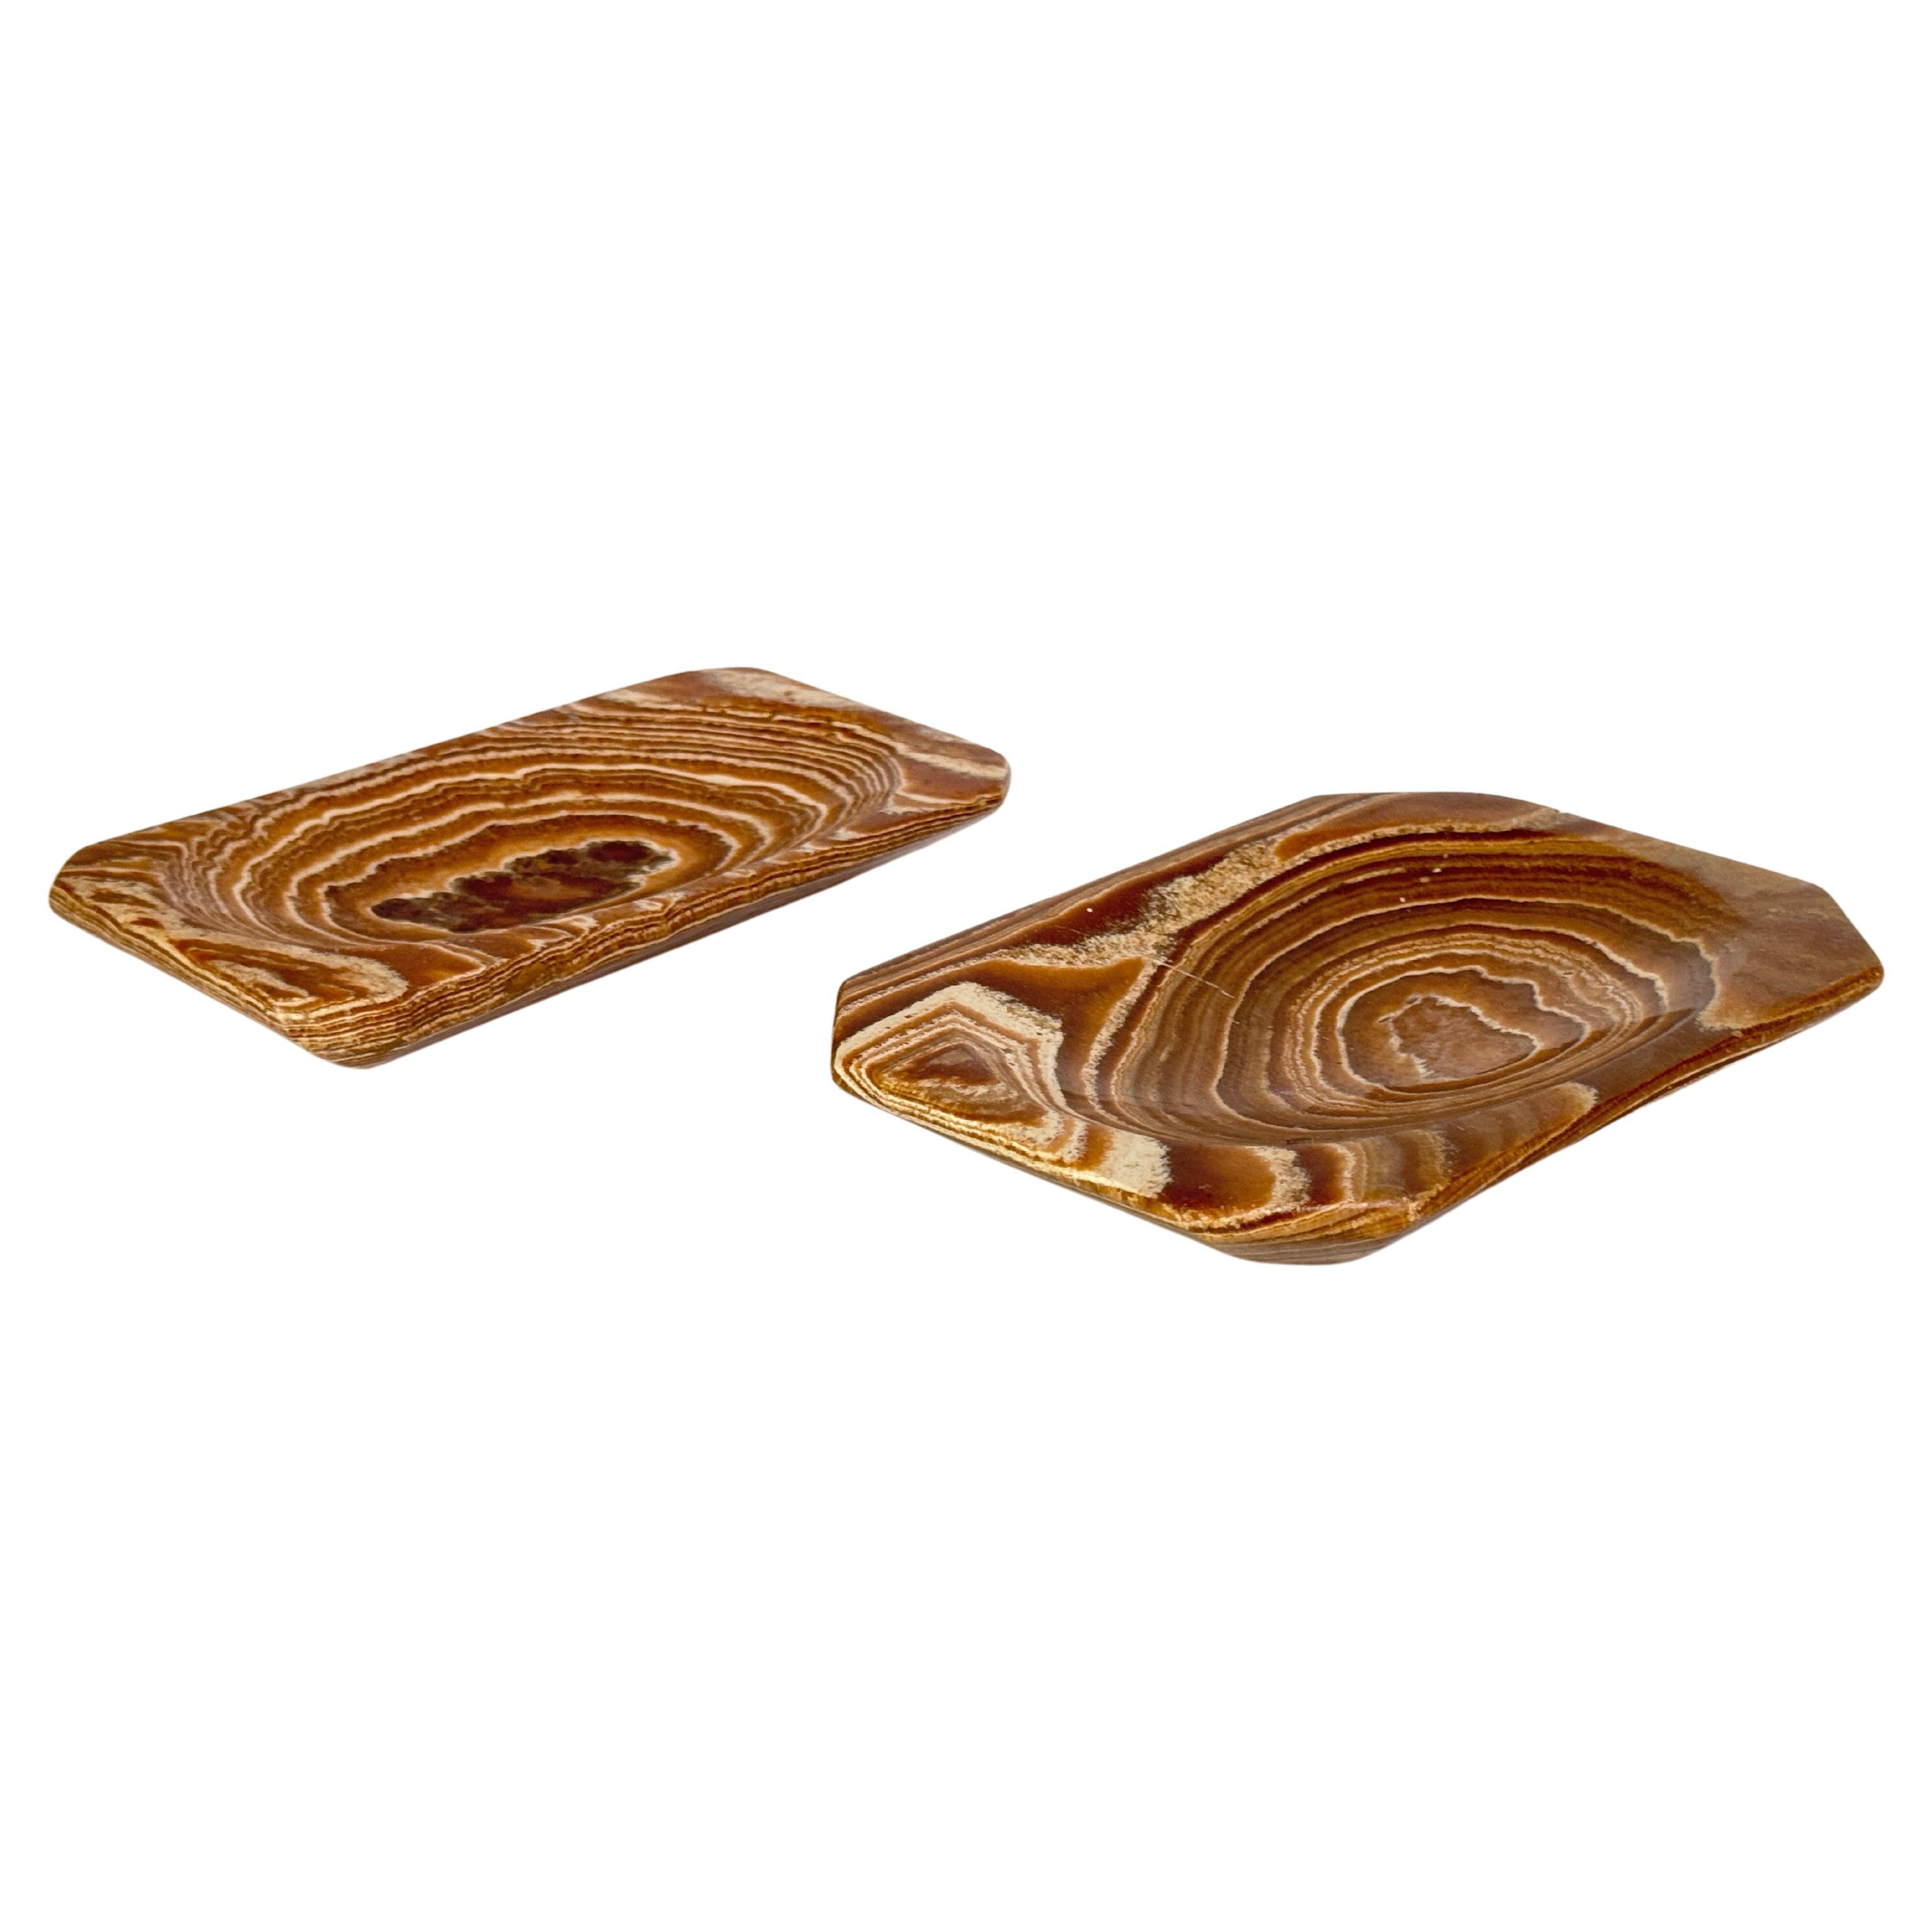 Agate Ashtray or Vide Poche, Brown Color Italy 1970 Set of 2 For Sale